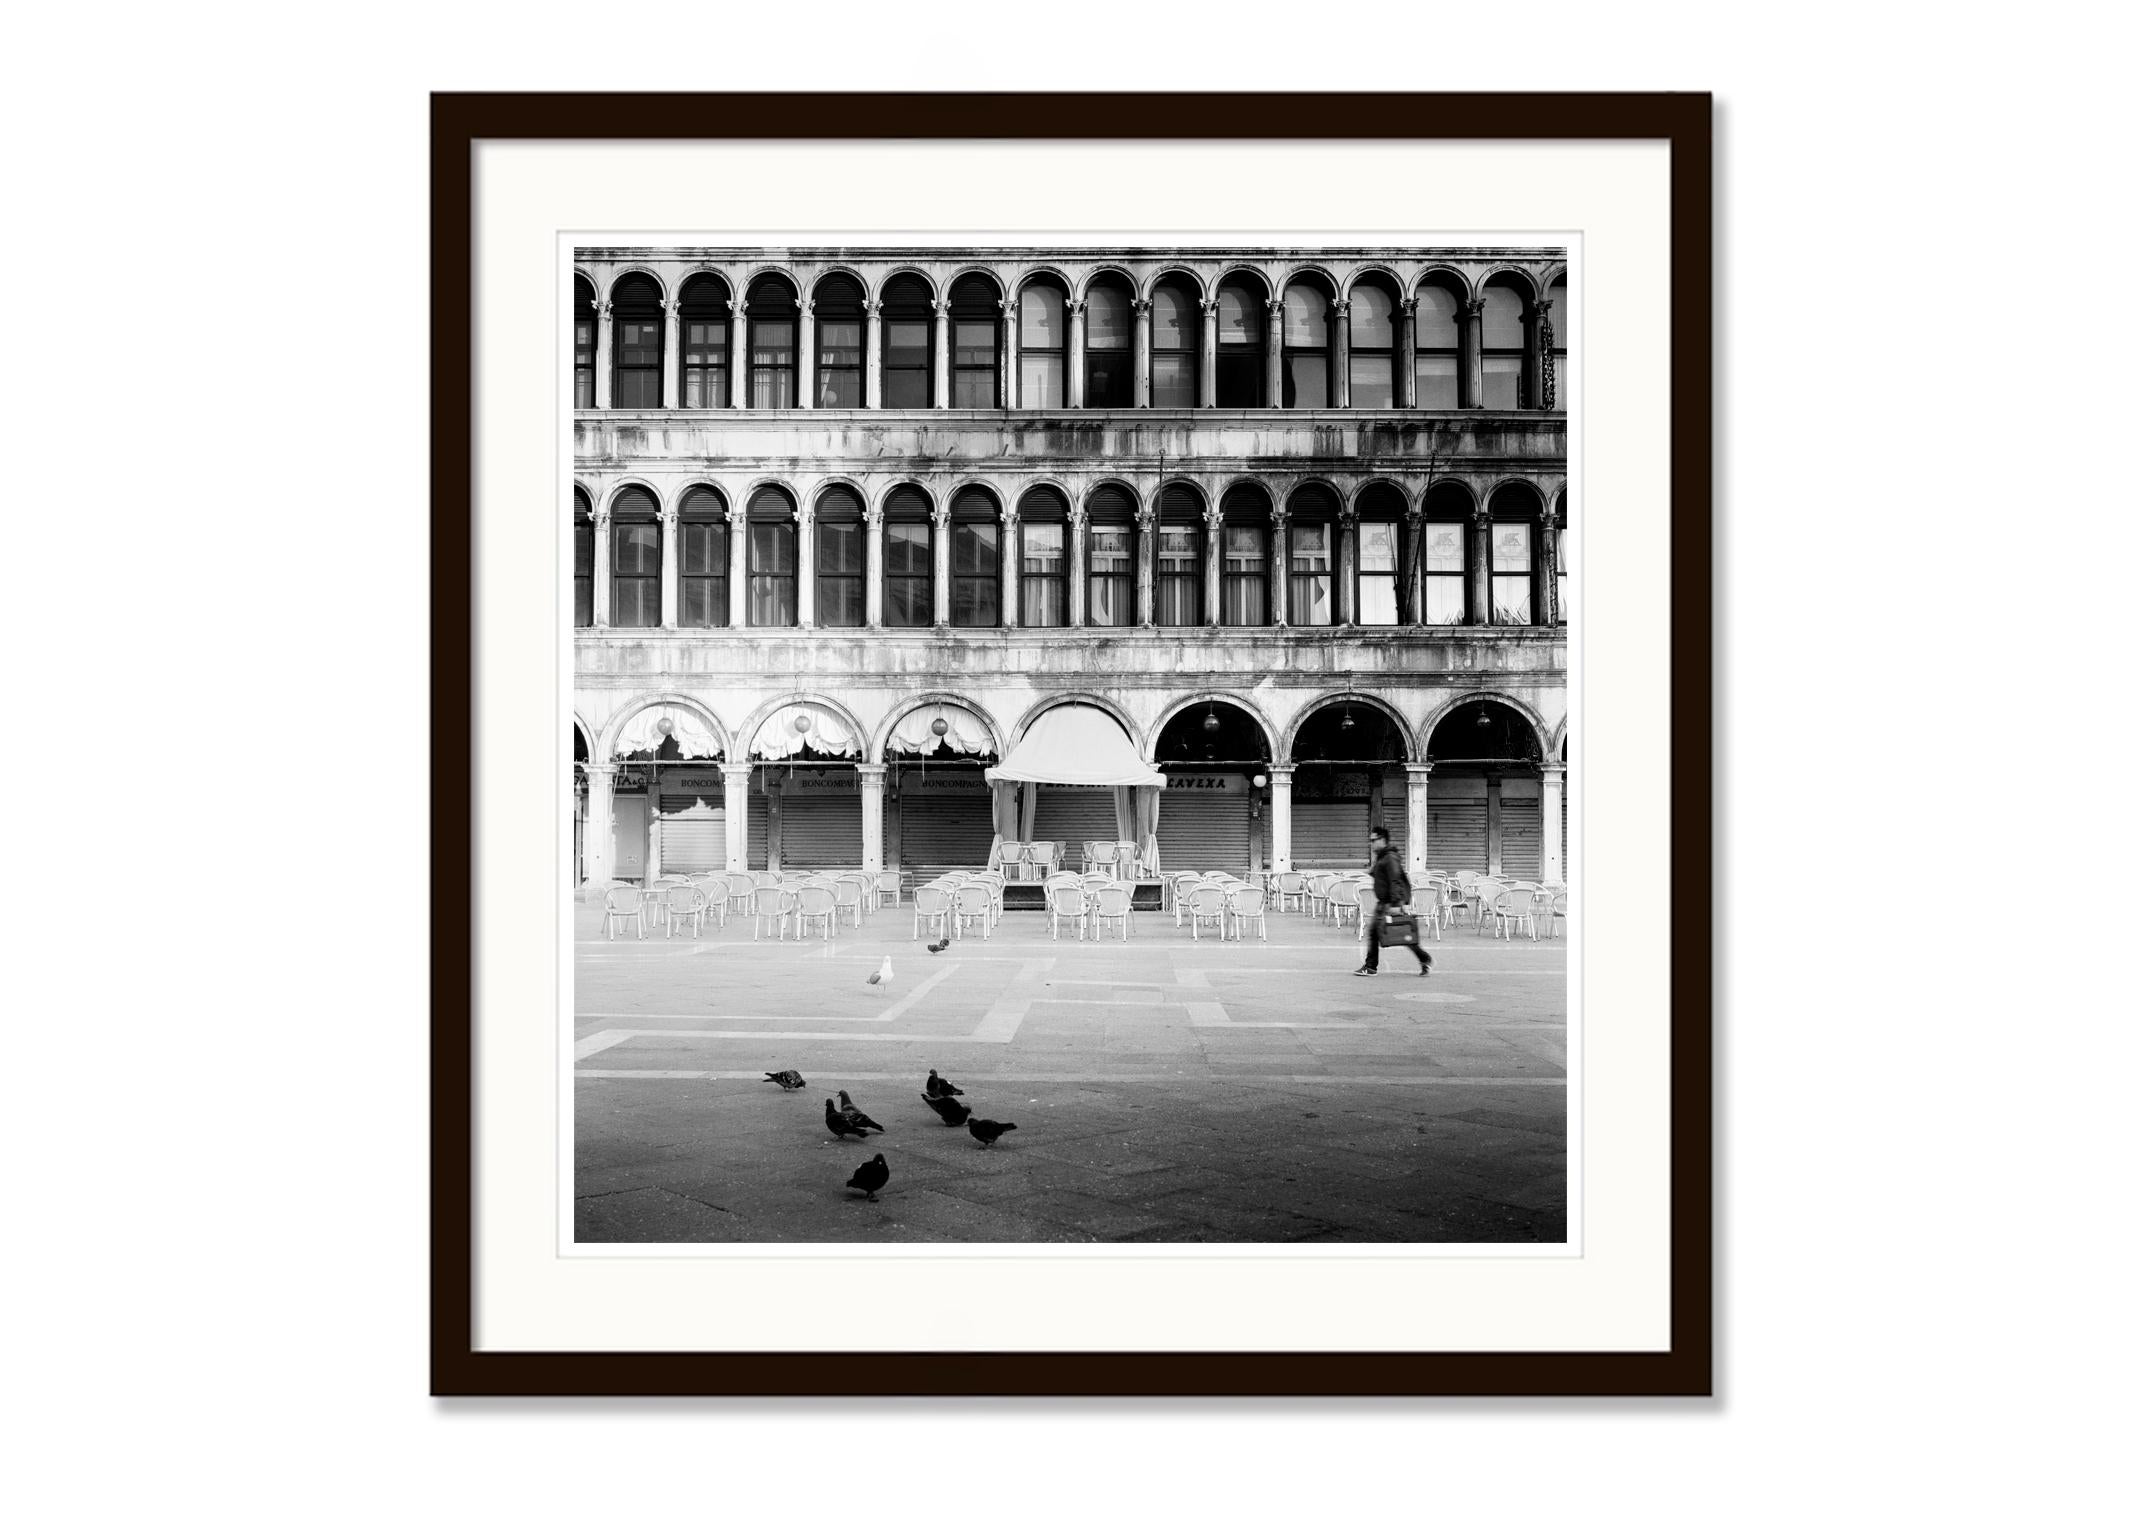 Caffe Florian, Venice - Black and White fine art cityscape film photography - Contemporary Photograph by Gerald Berghammer